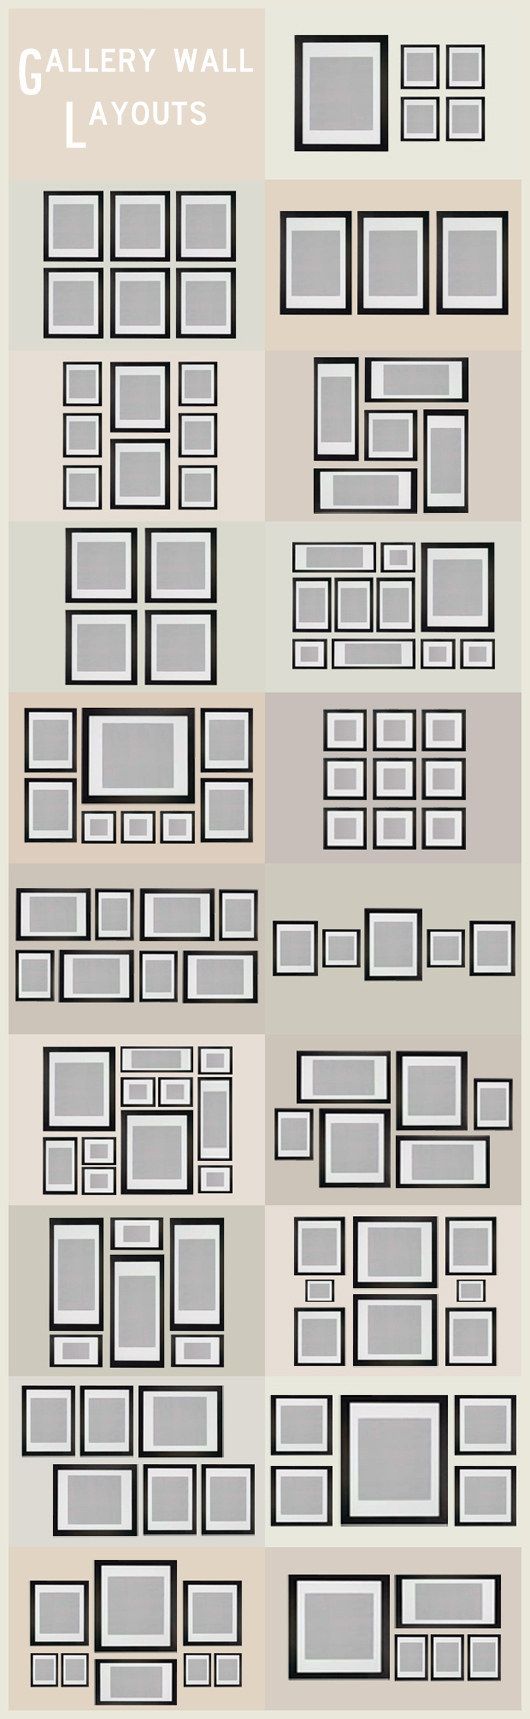 Gallery Wall Layout Ideas | These Diagrams Are Everything You Need To Decorate Your Home